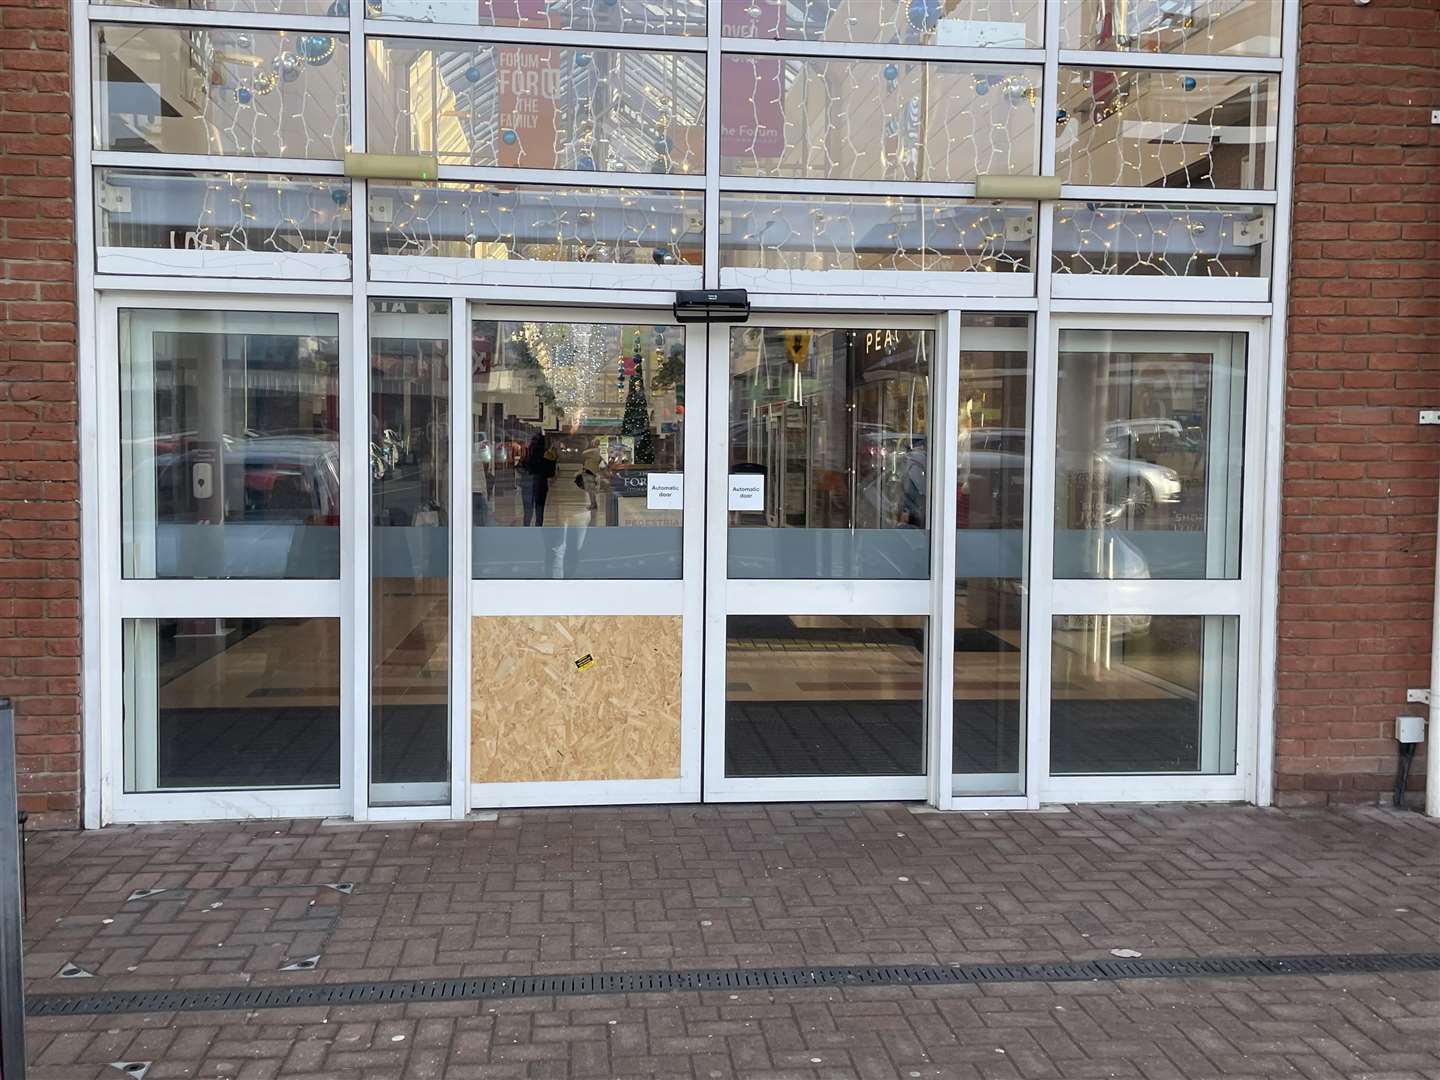 The Forum shopping centre in Sittingbourne was smashed into by two men before CEX was targeted in a burlgary